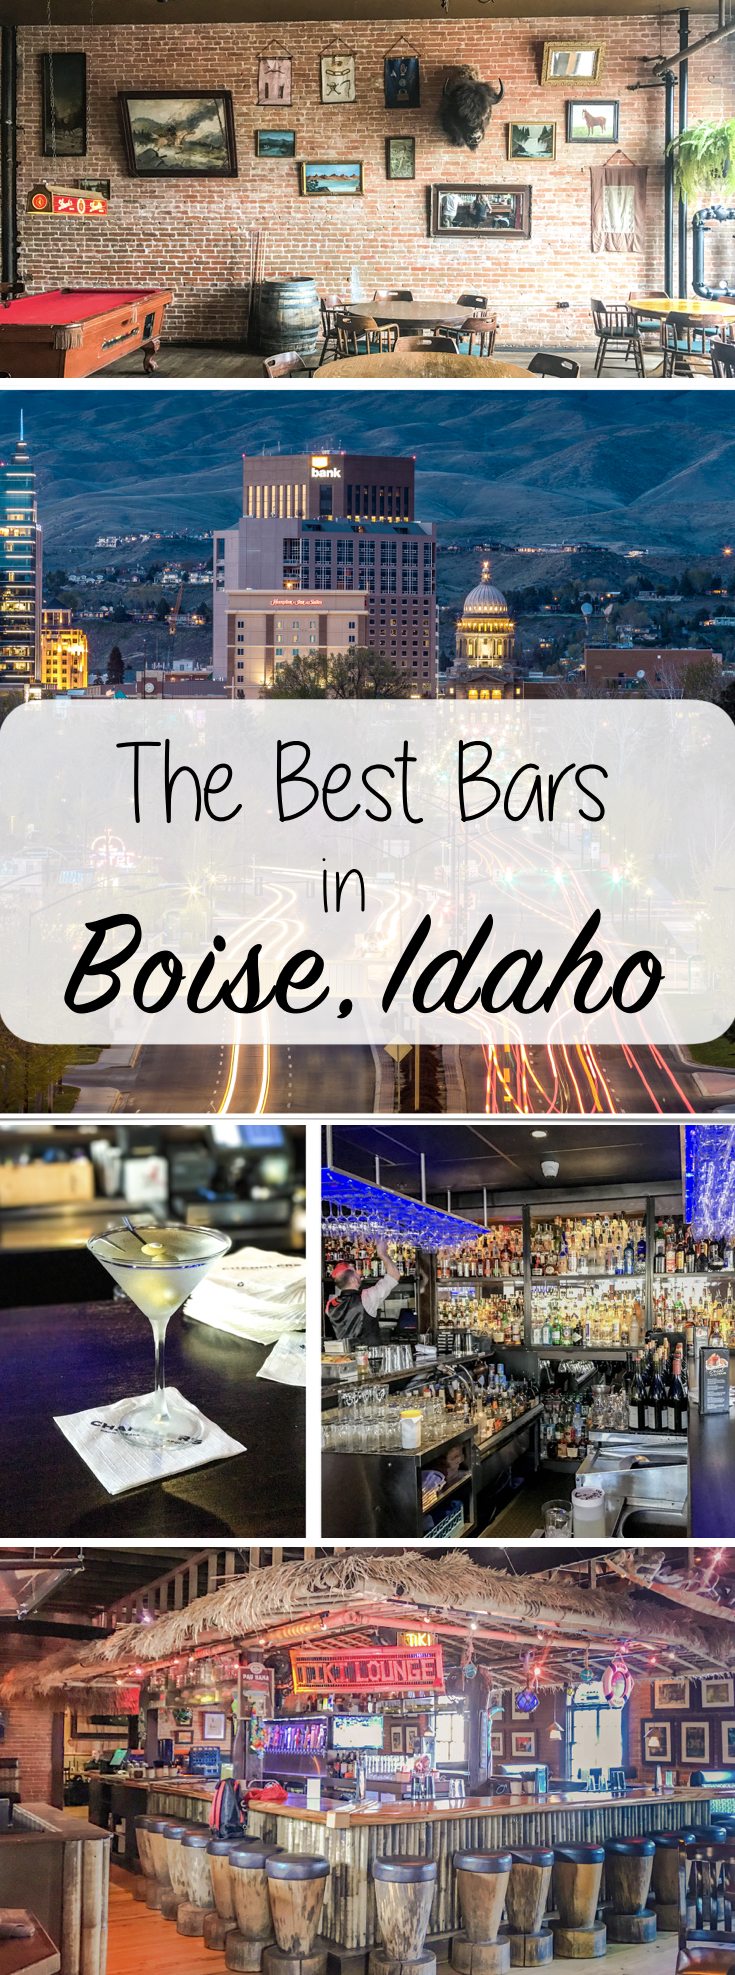 The Best Bars in Boise